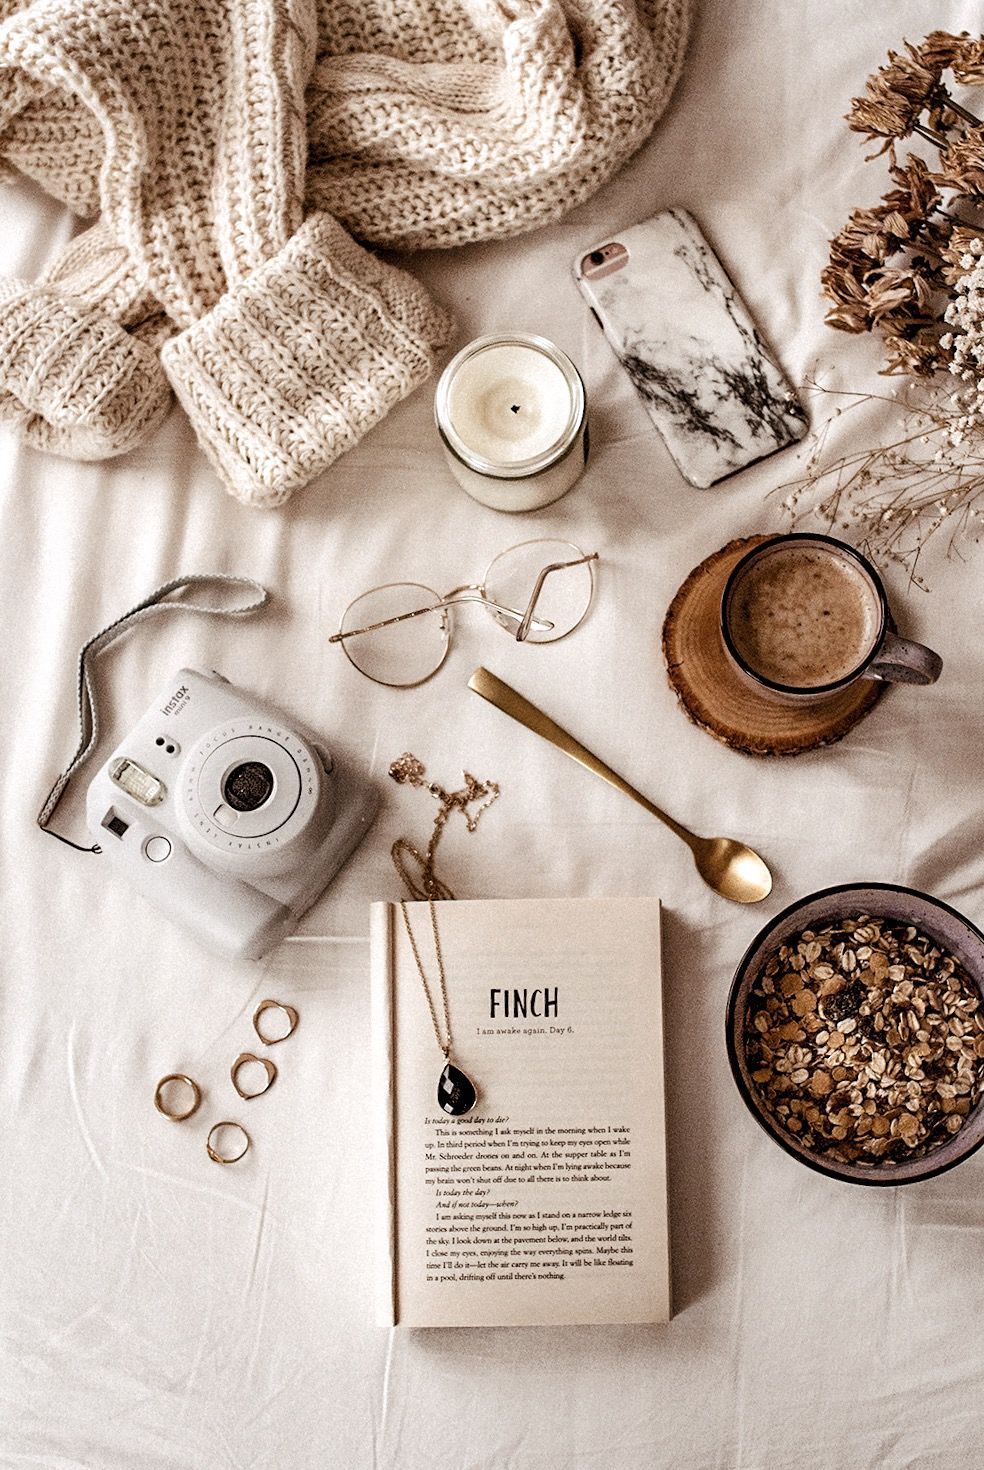 A book, coffee and other items on the bed - Cozy, flat lay